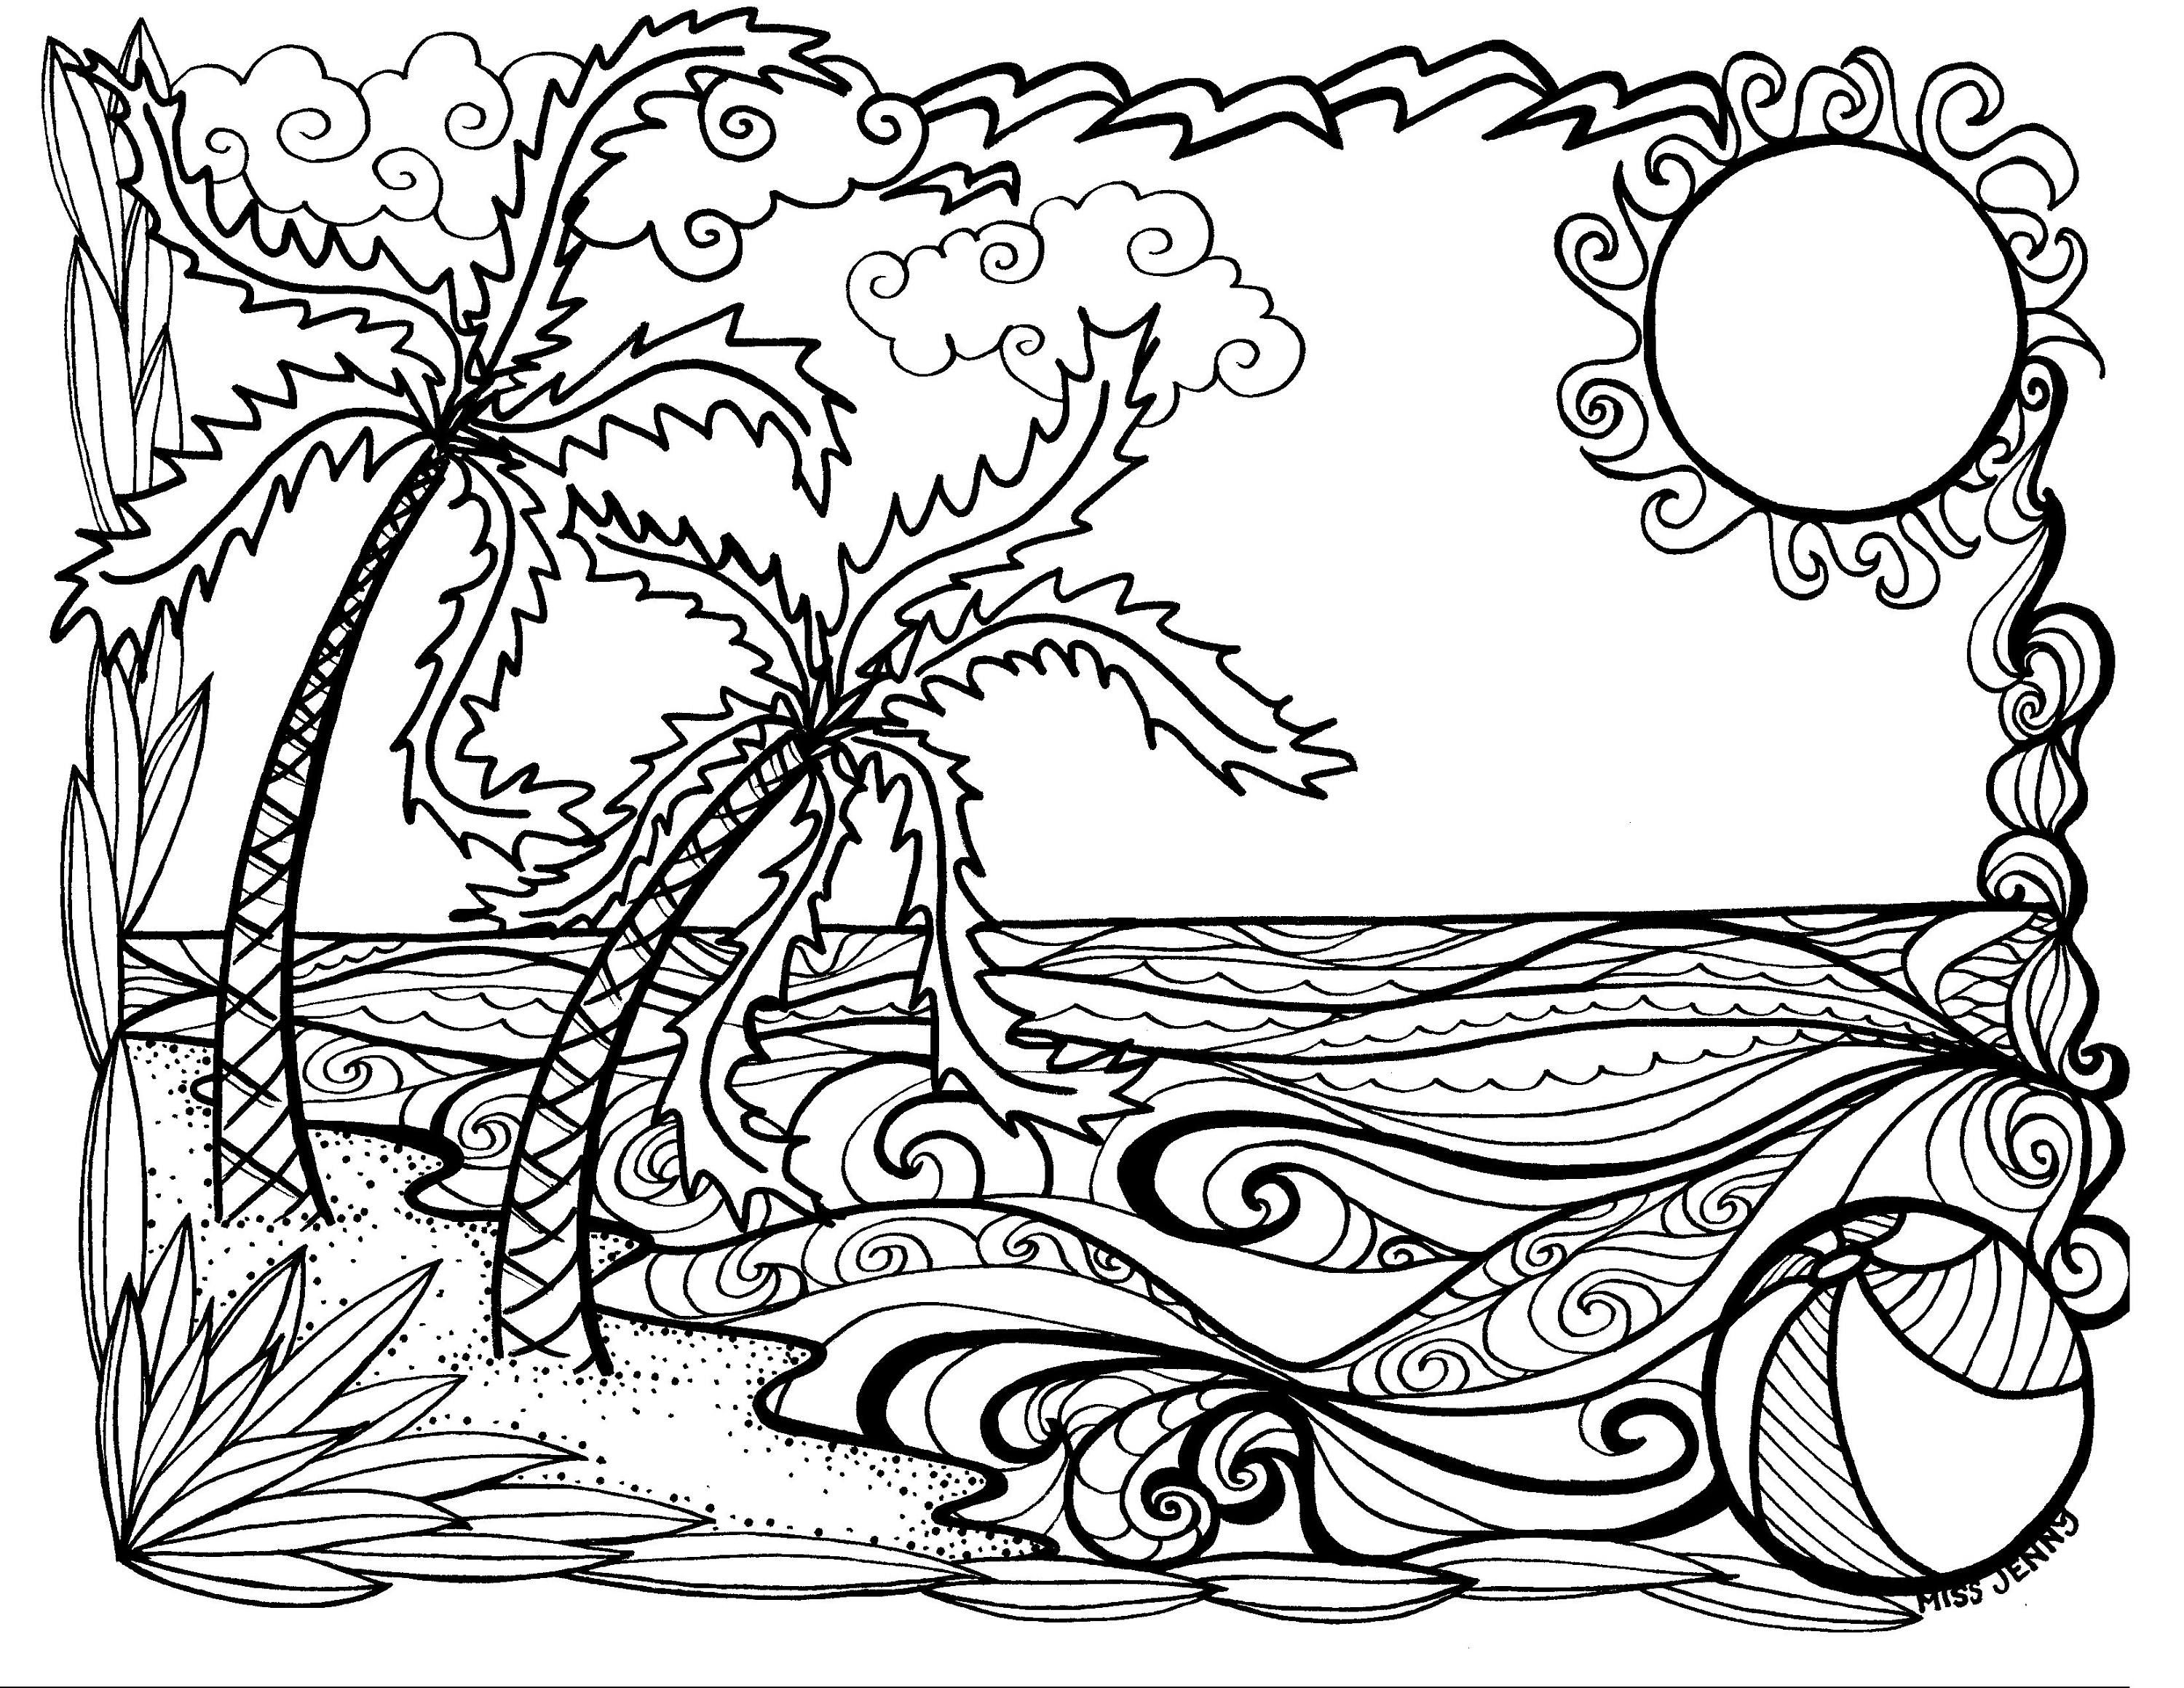 1960s Coloring Pages at GetColorings.com | Free printable colorings